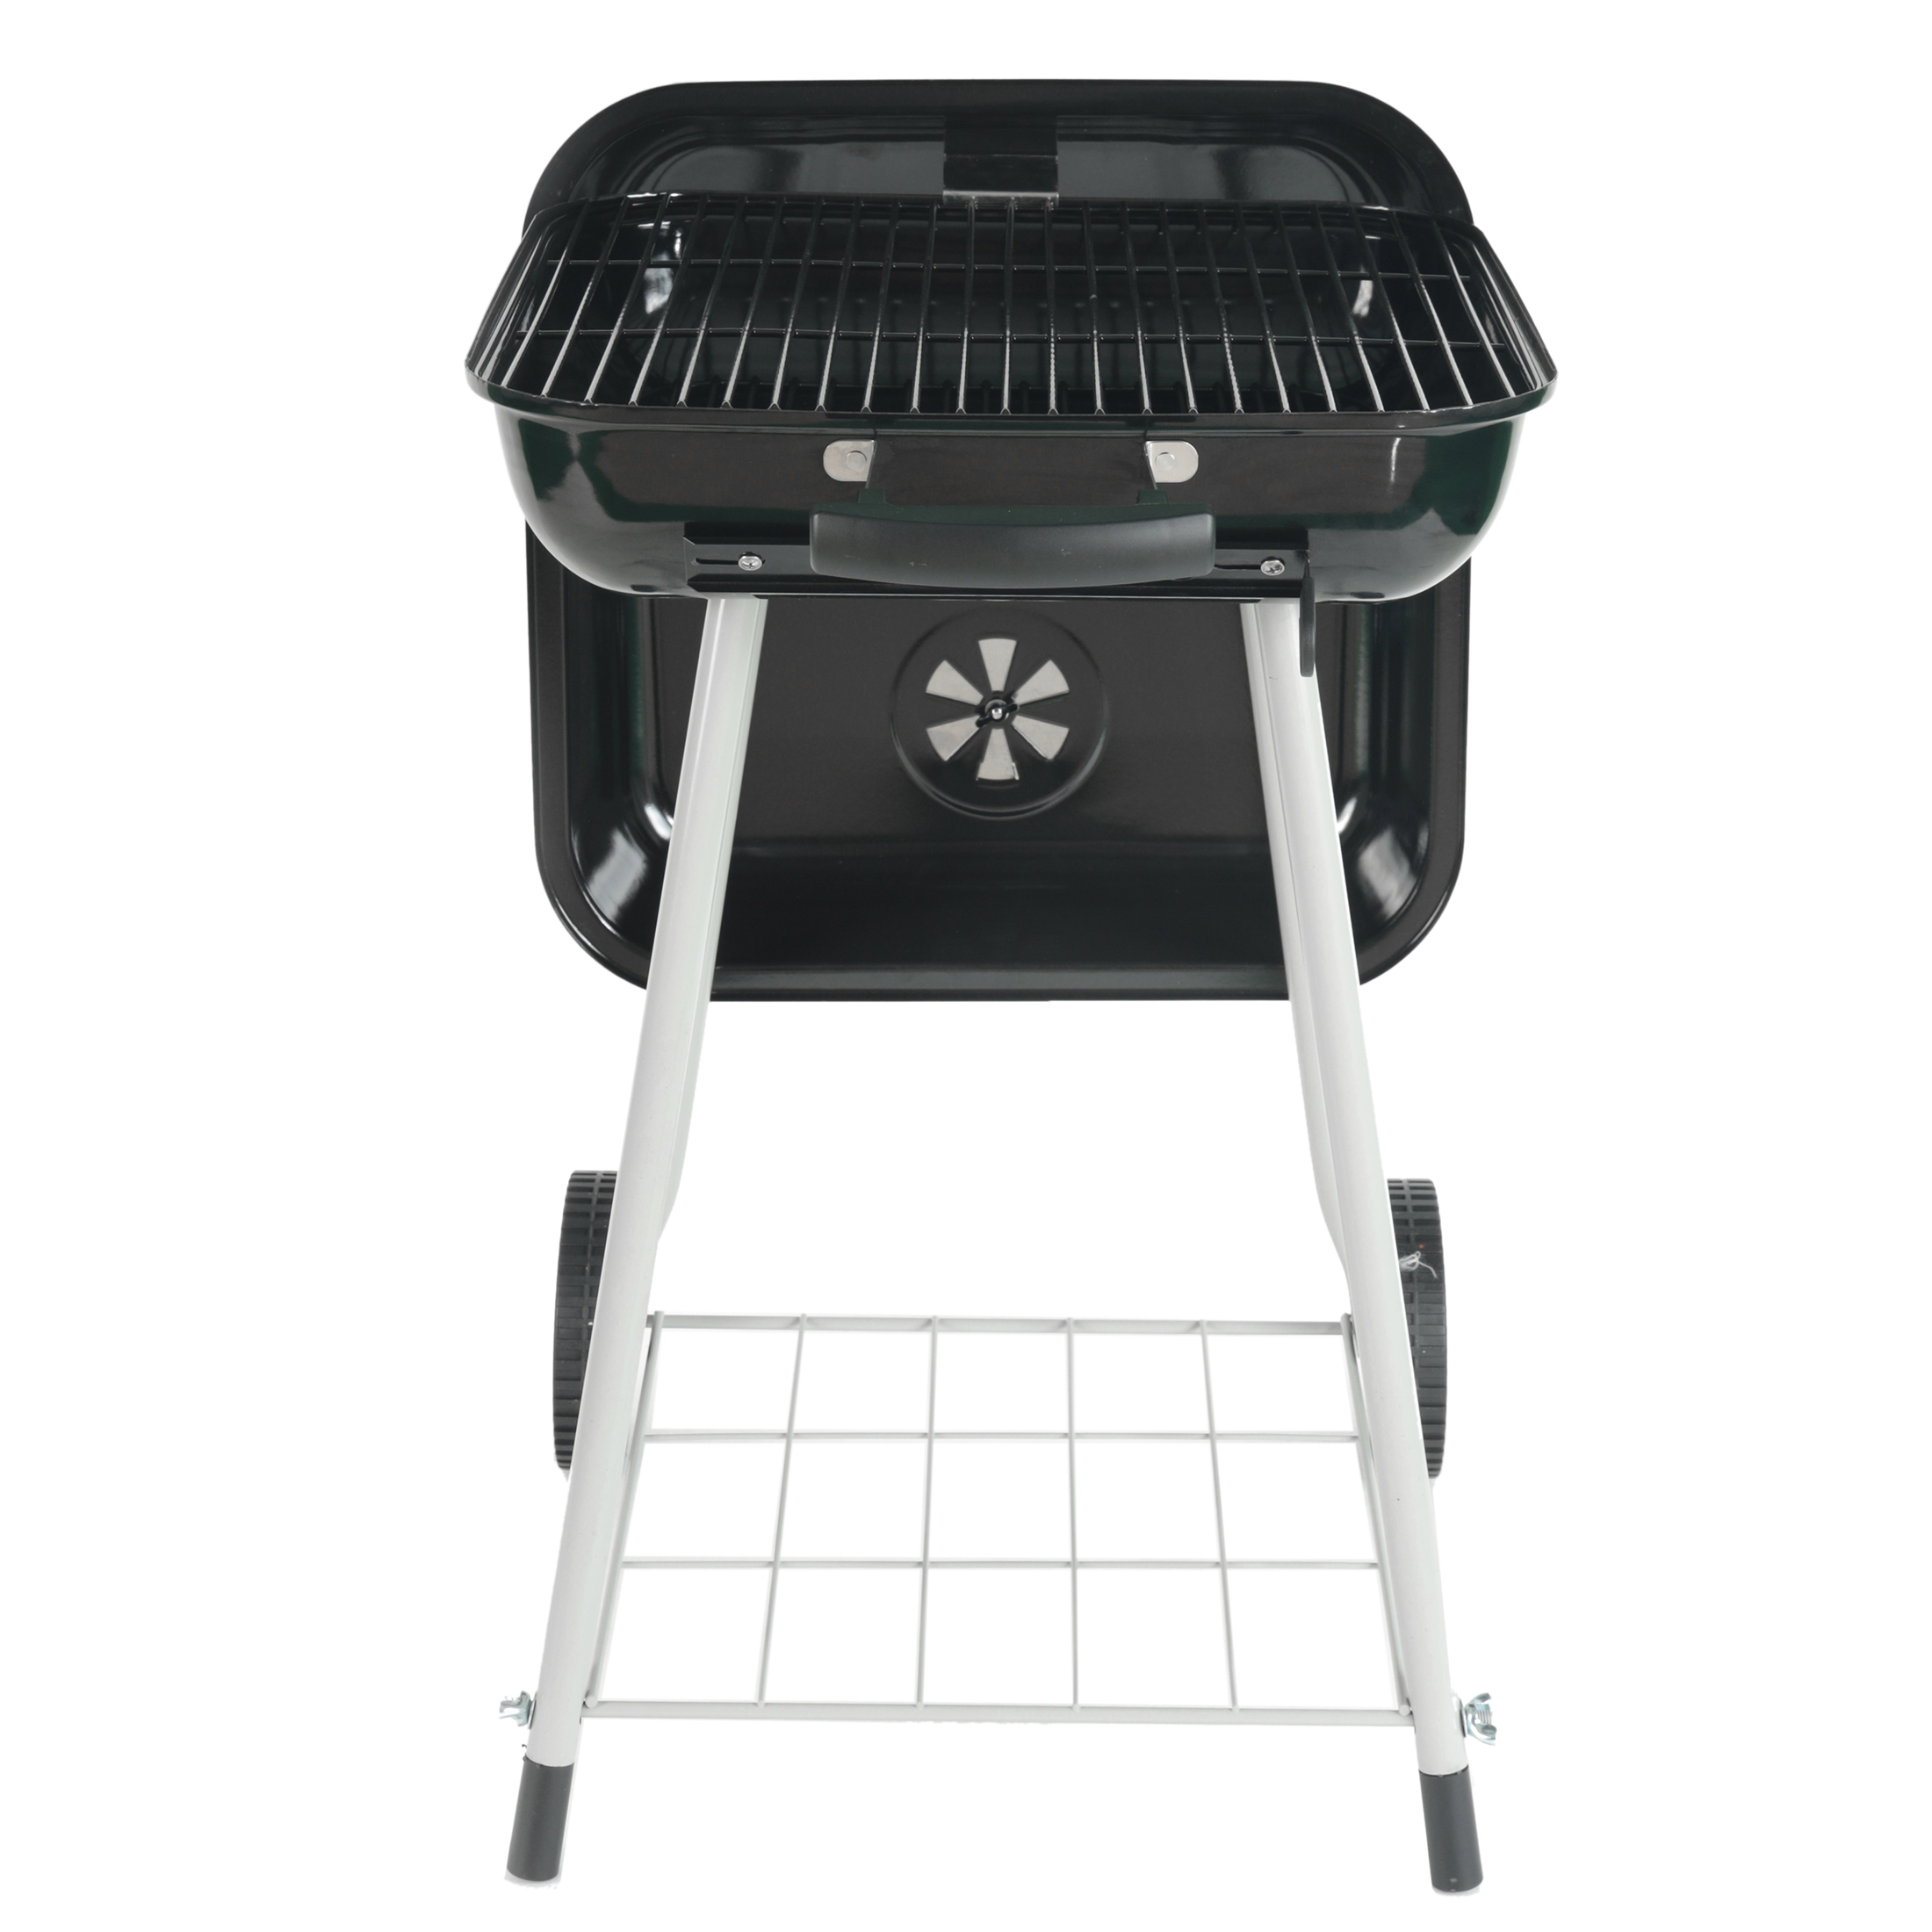 Expert Grill 17.5" Square Steel Charcoal Grill with Wheels, Black - image 3 of 18